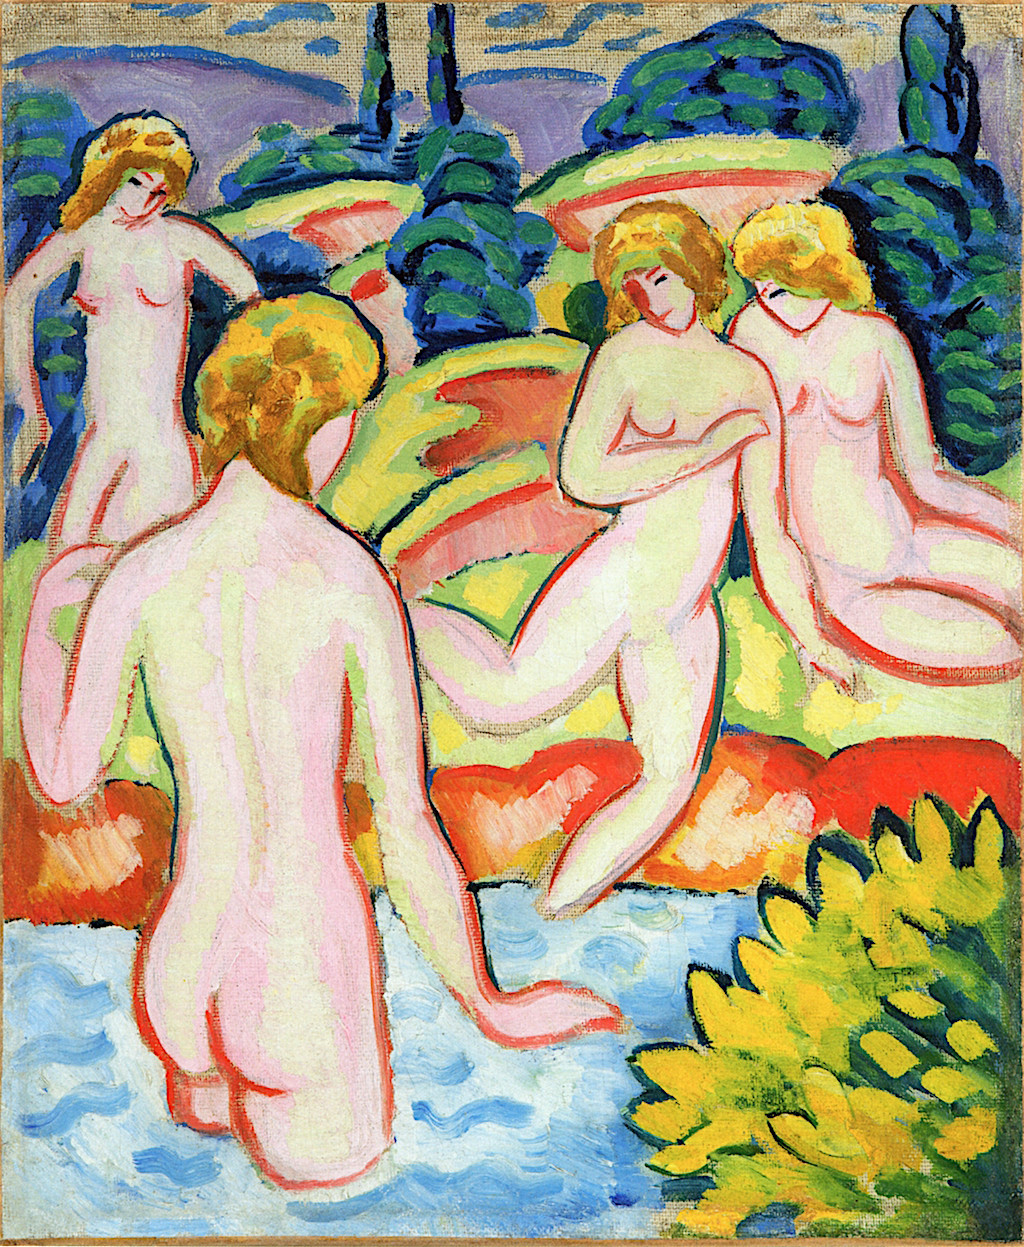 Bathers with Trees of Life 1910